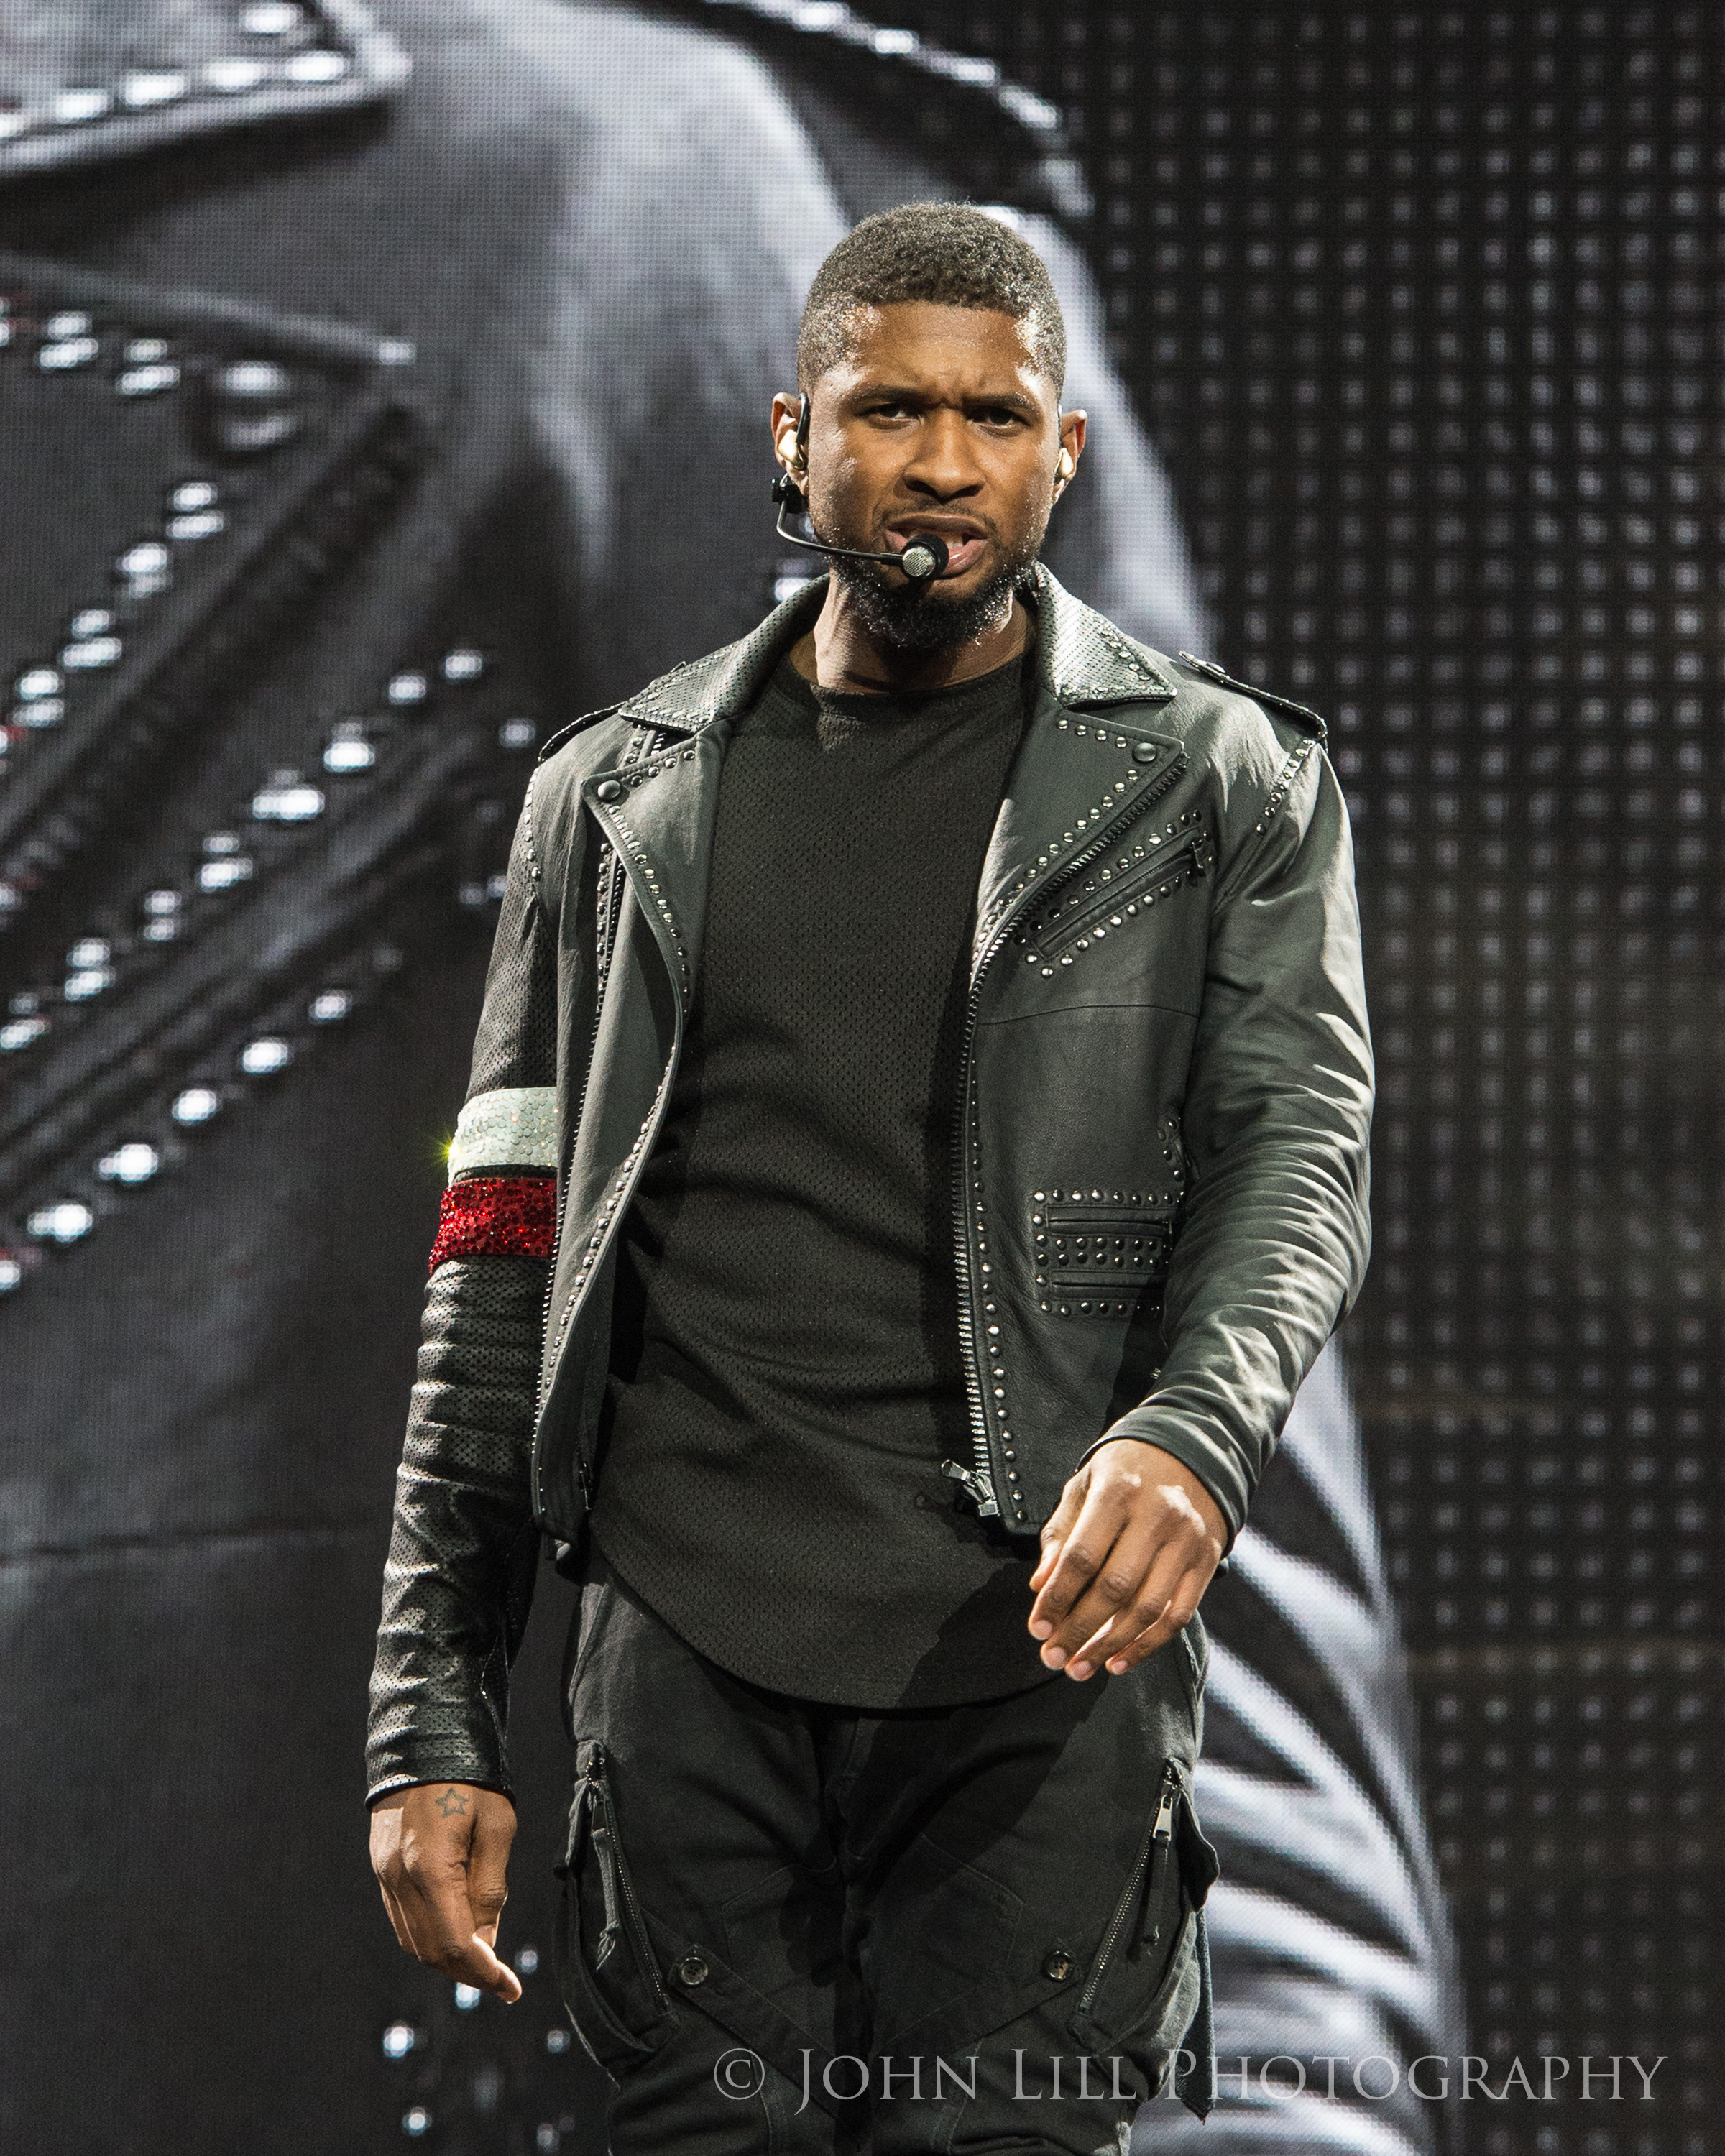 Usher performs at Key Arena. Photo by John Lill